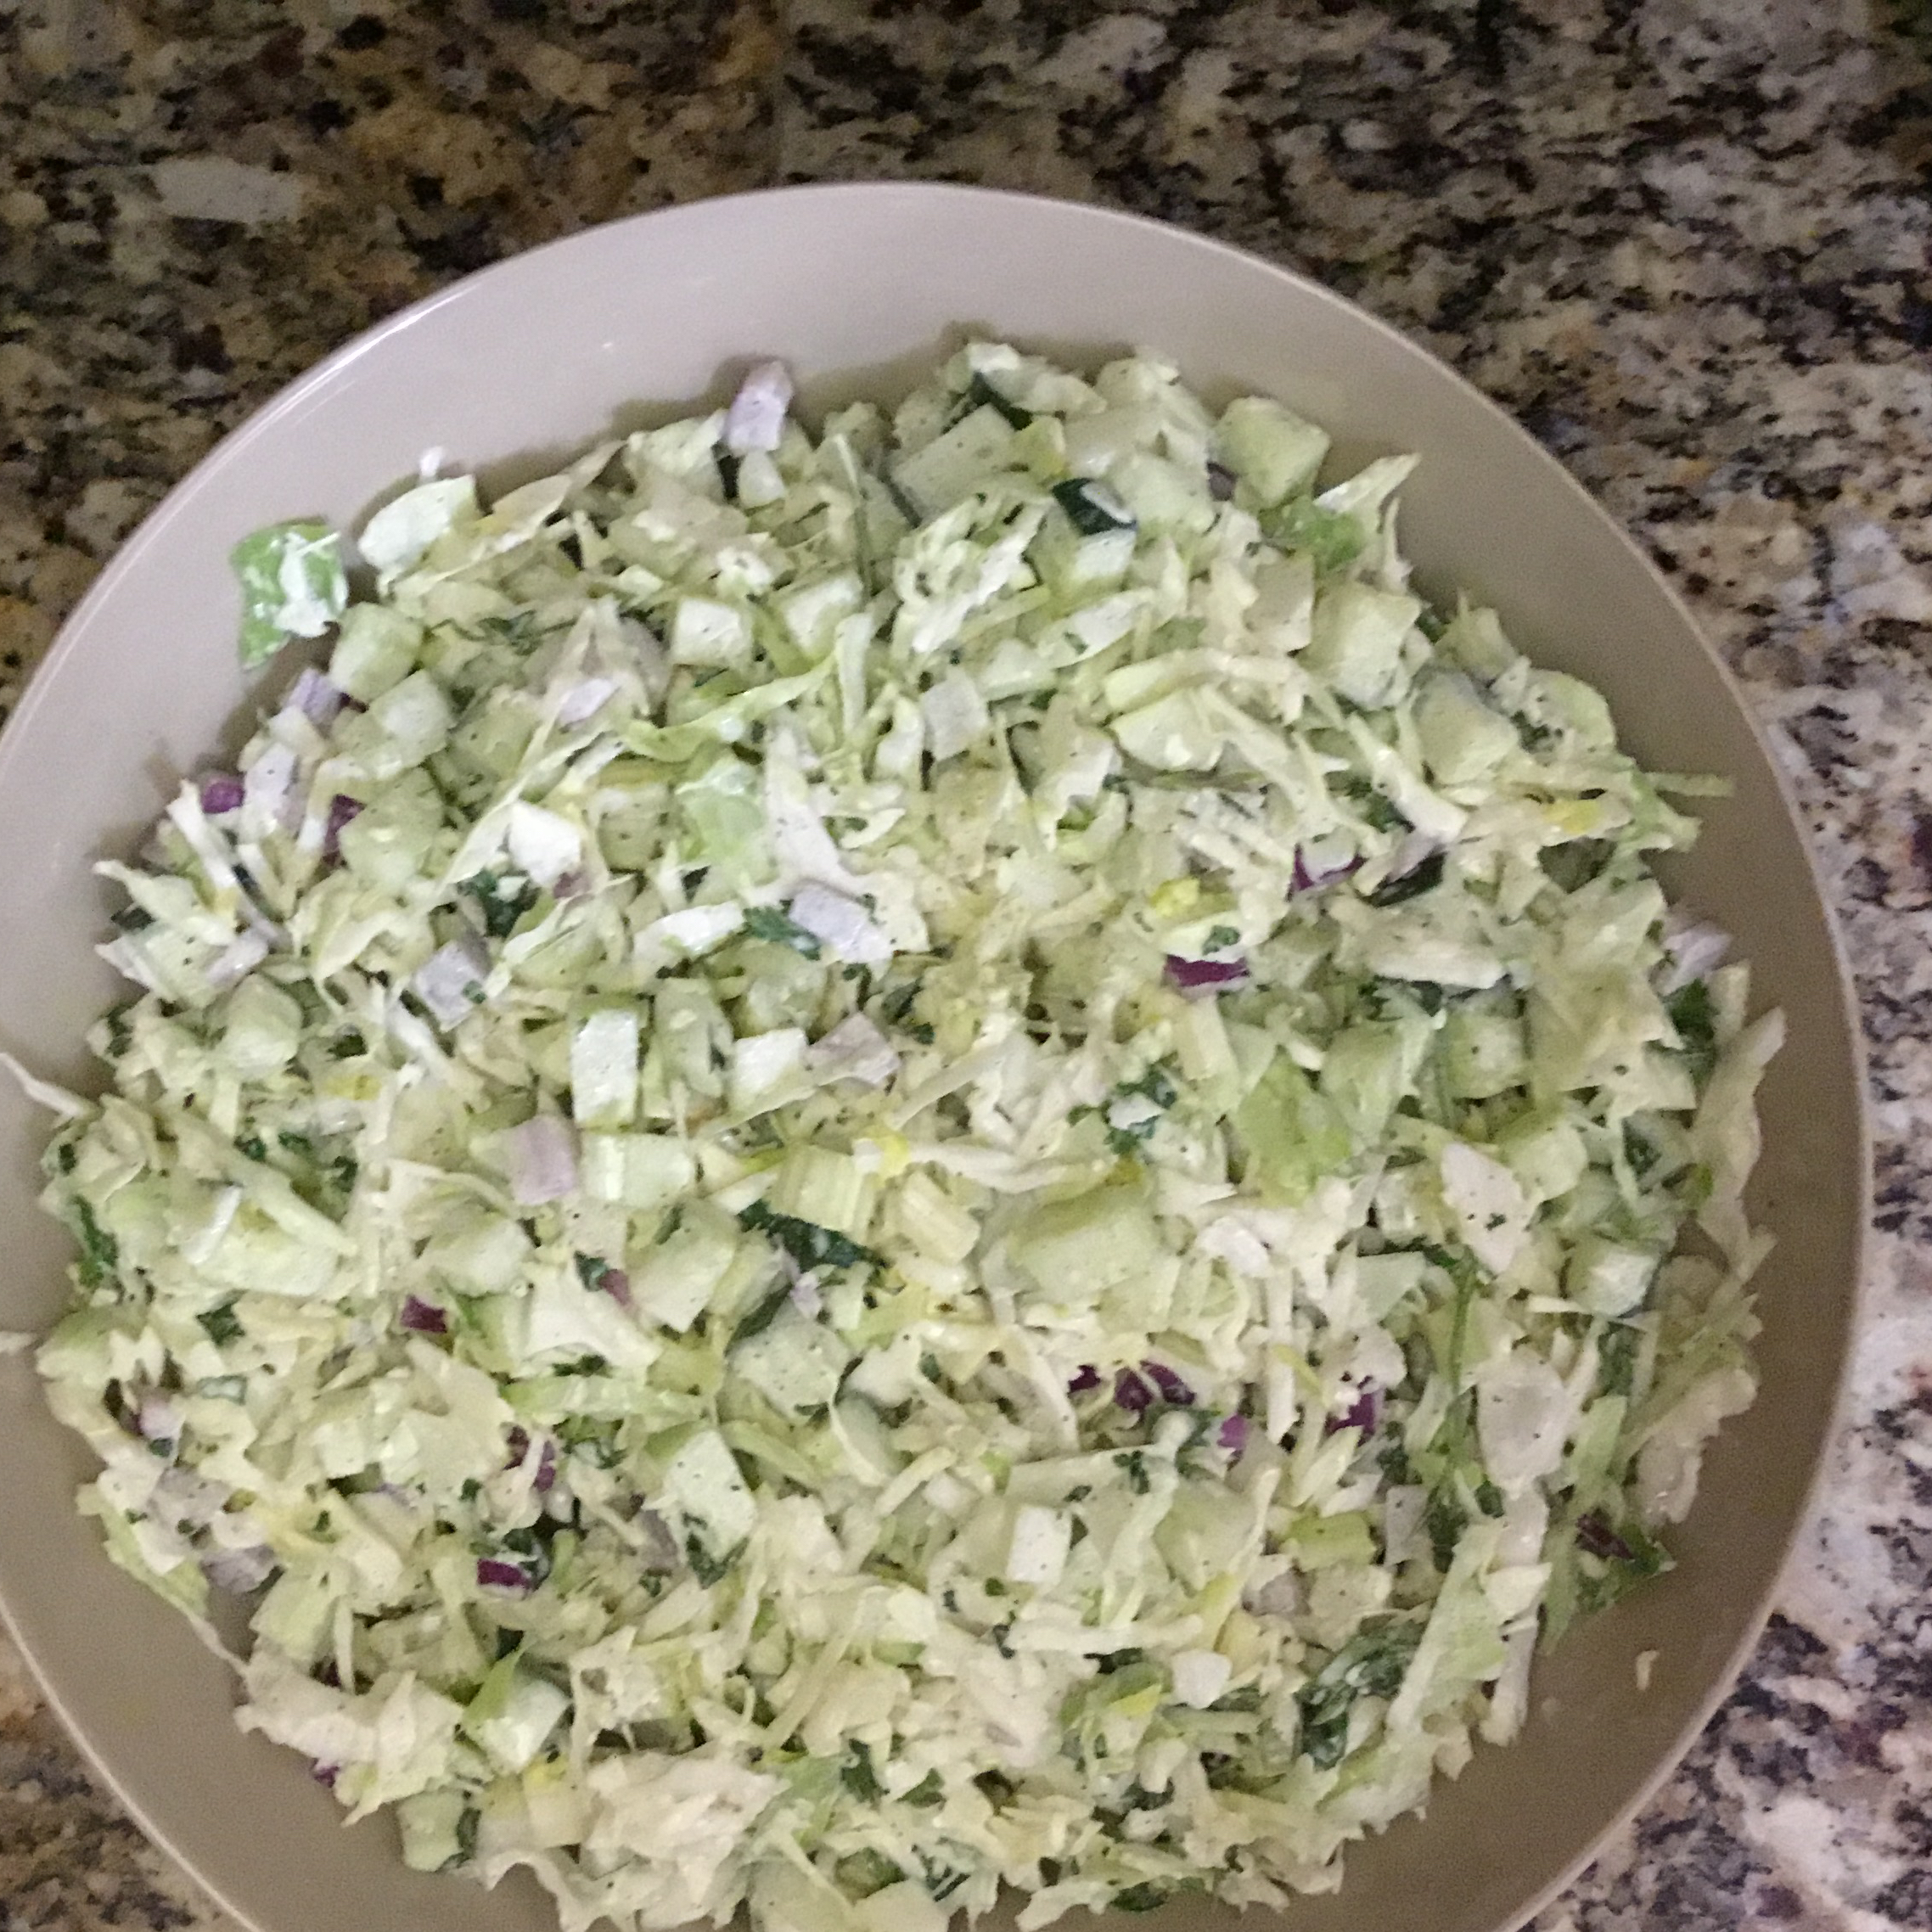 Peppery Coleslaw with Cucumbers and Celery shonda